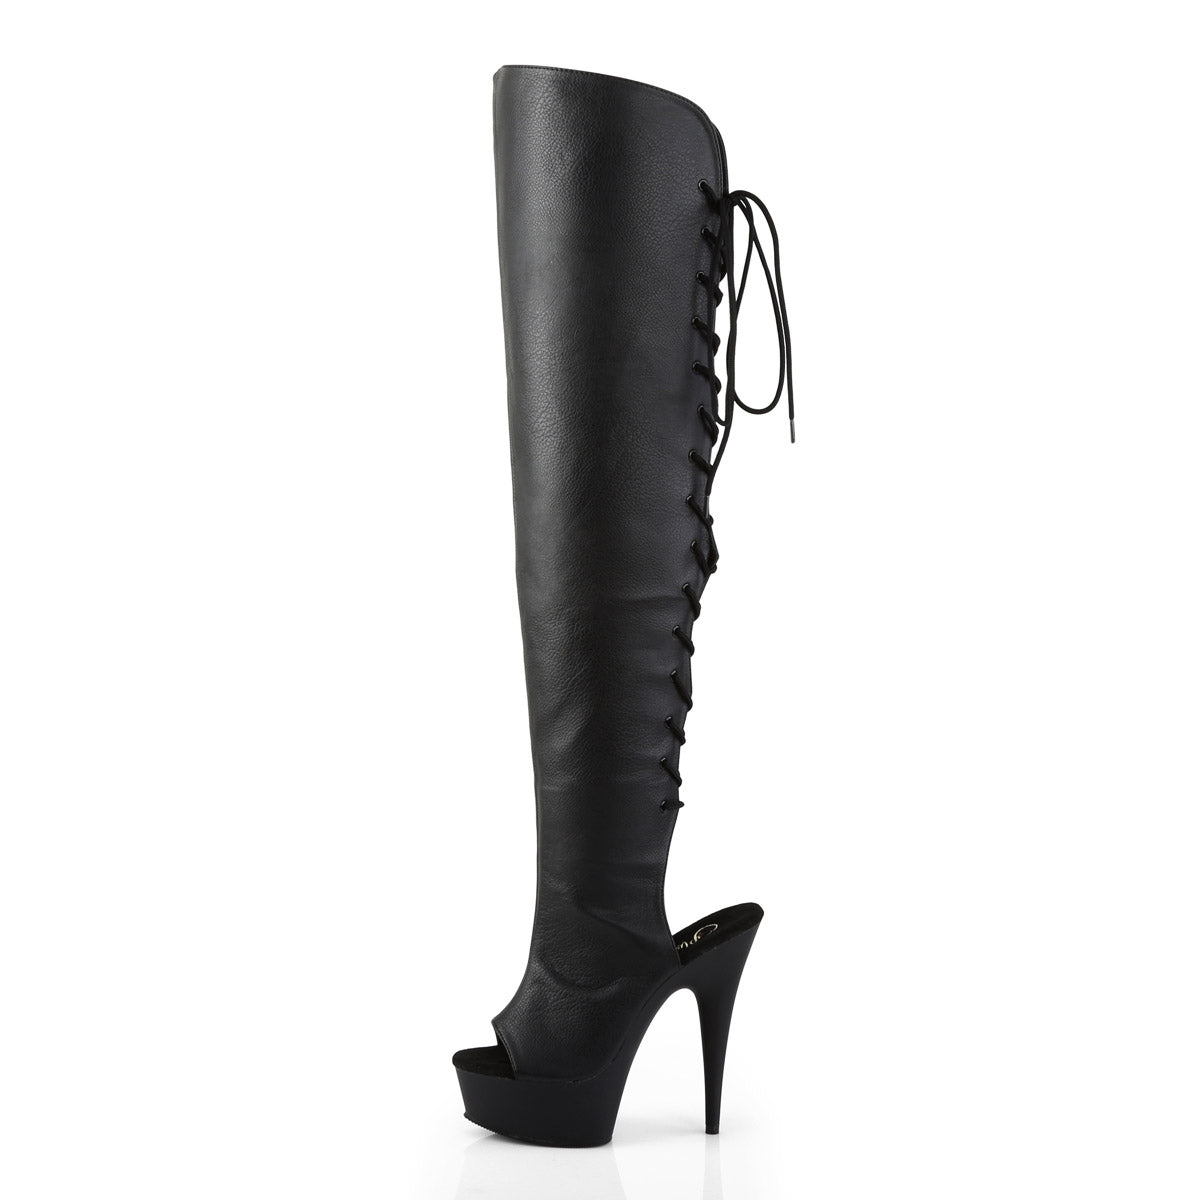 Lace Angled Thigh High Zip Side Platform Stiletto Heel Boots Shoes Pleaser Pleaser DELIGHT/3019